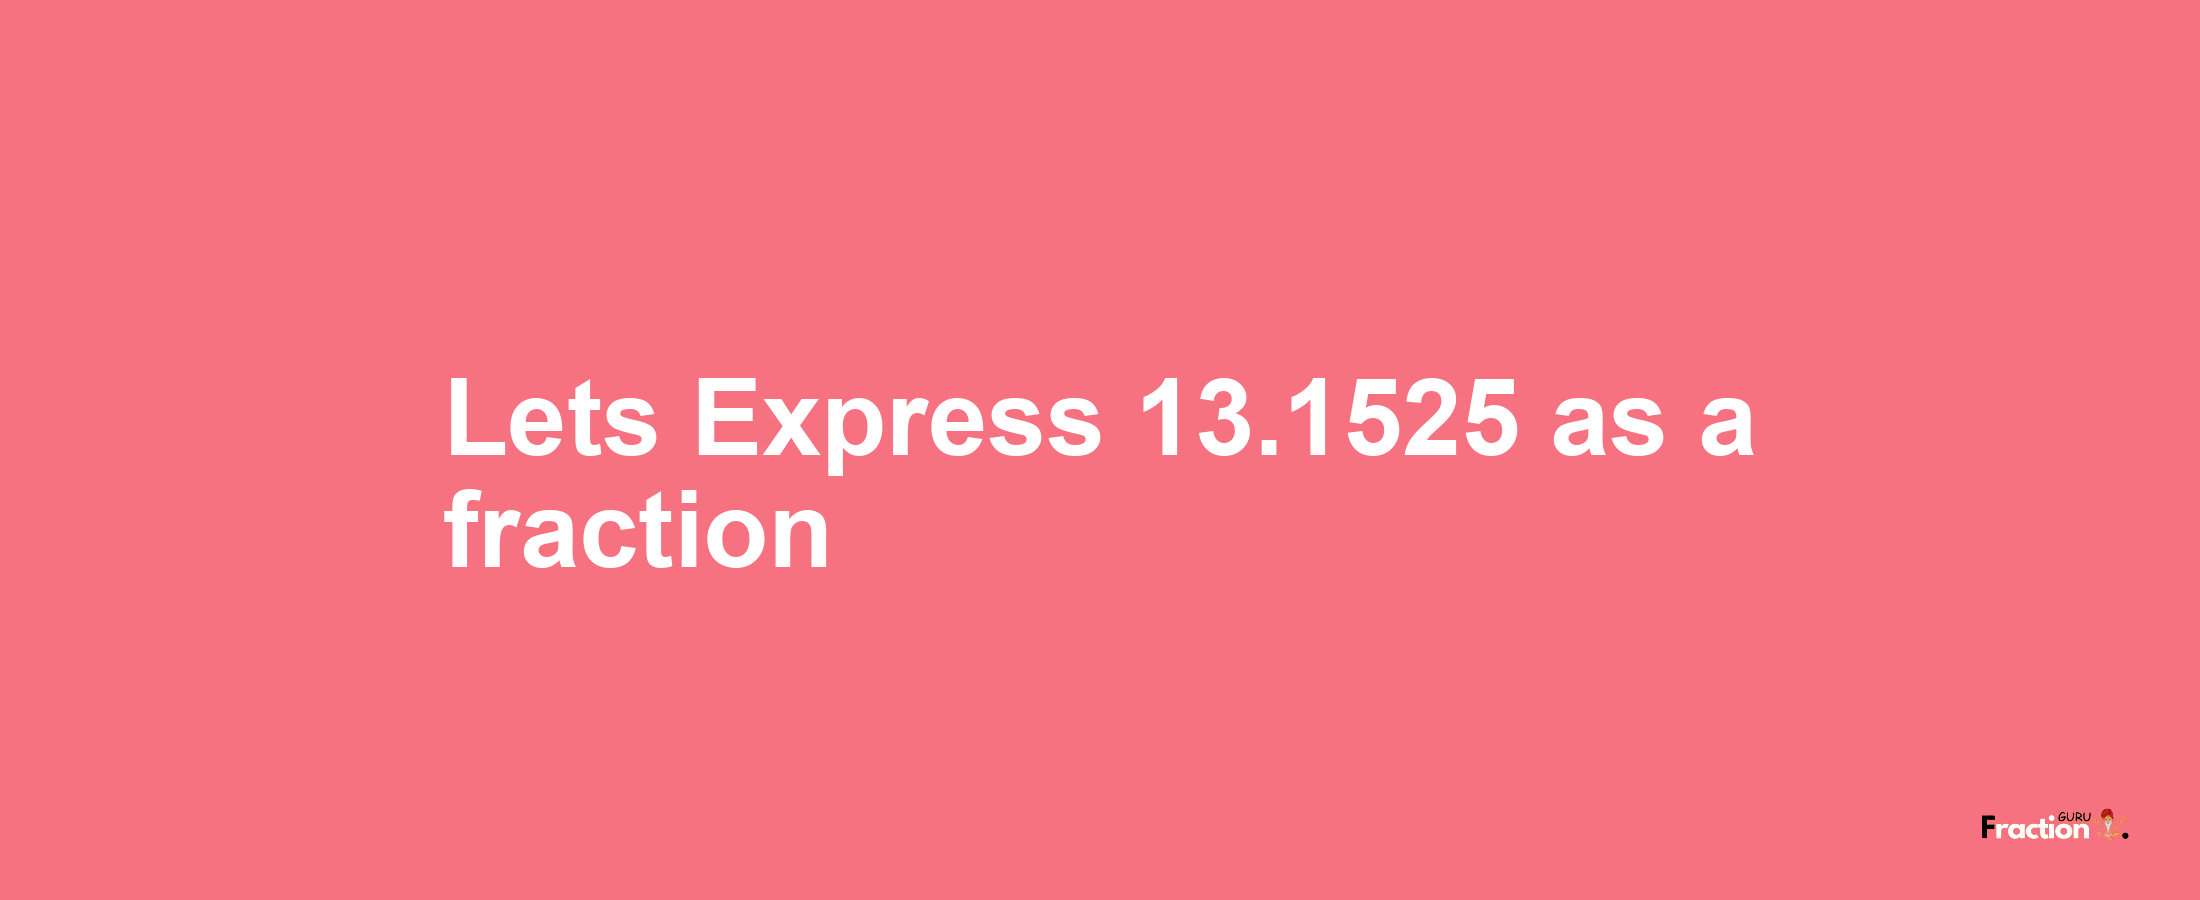 Lets Express 13.1525 as afraction